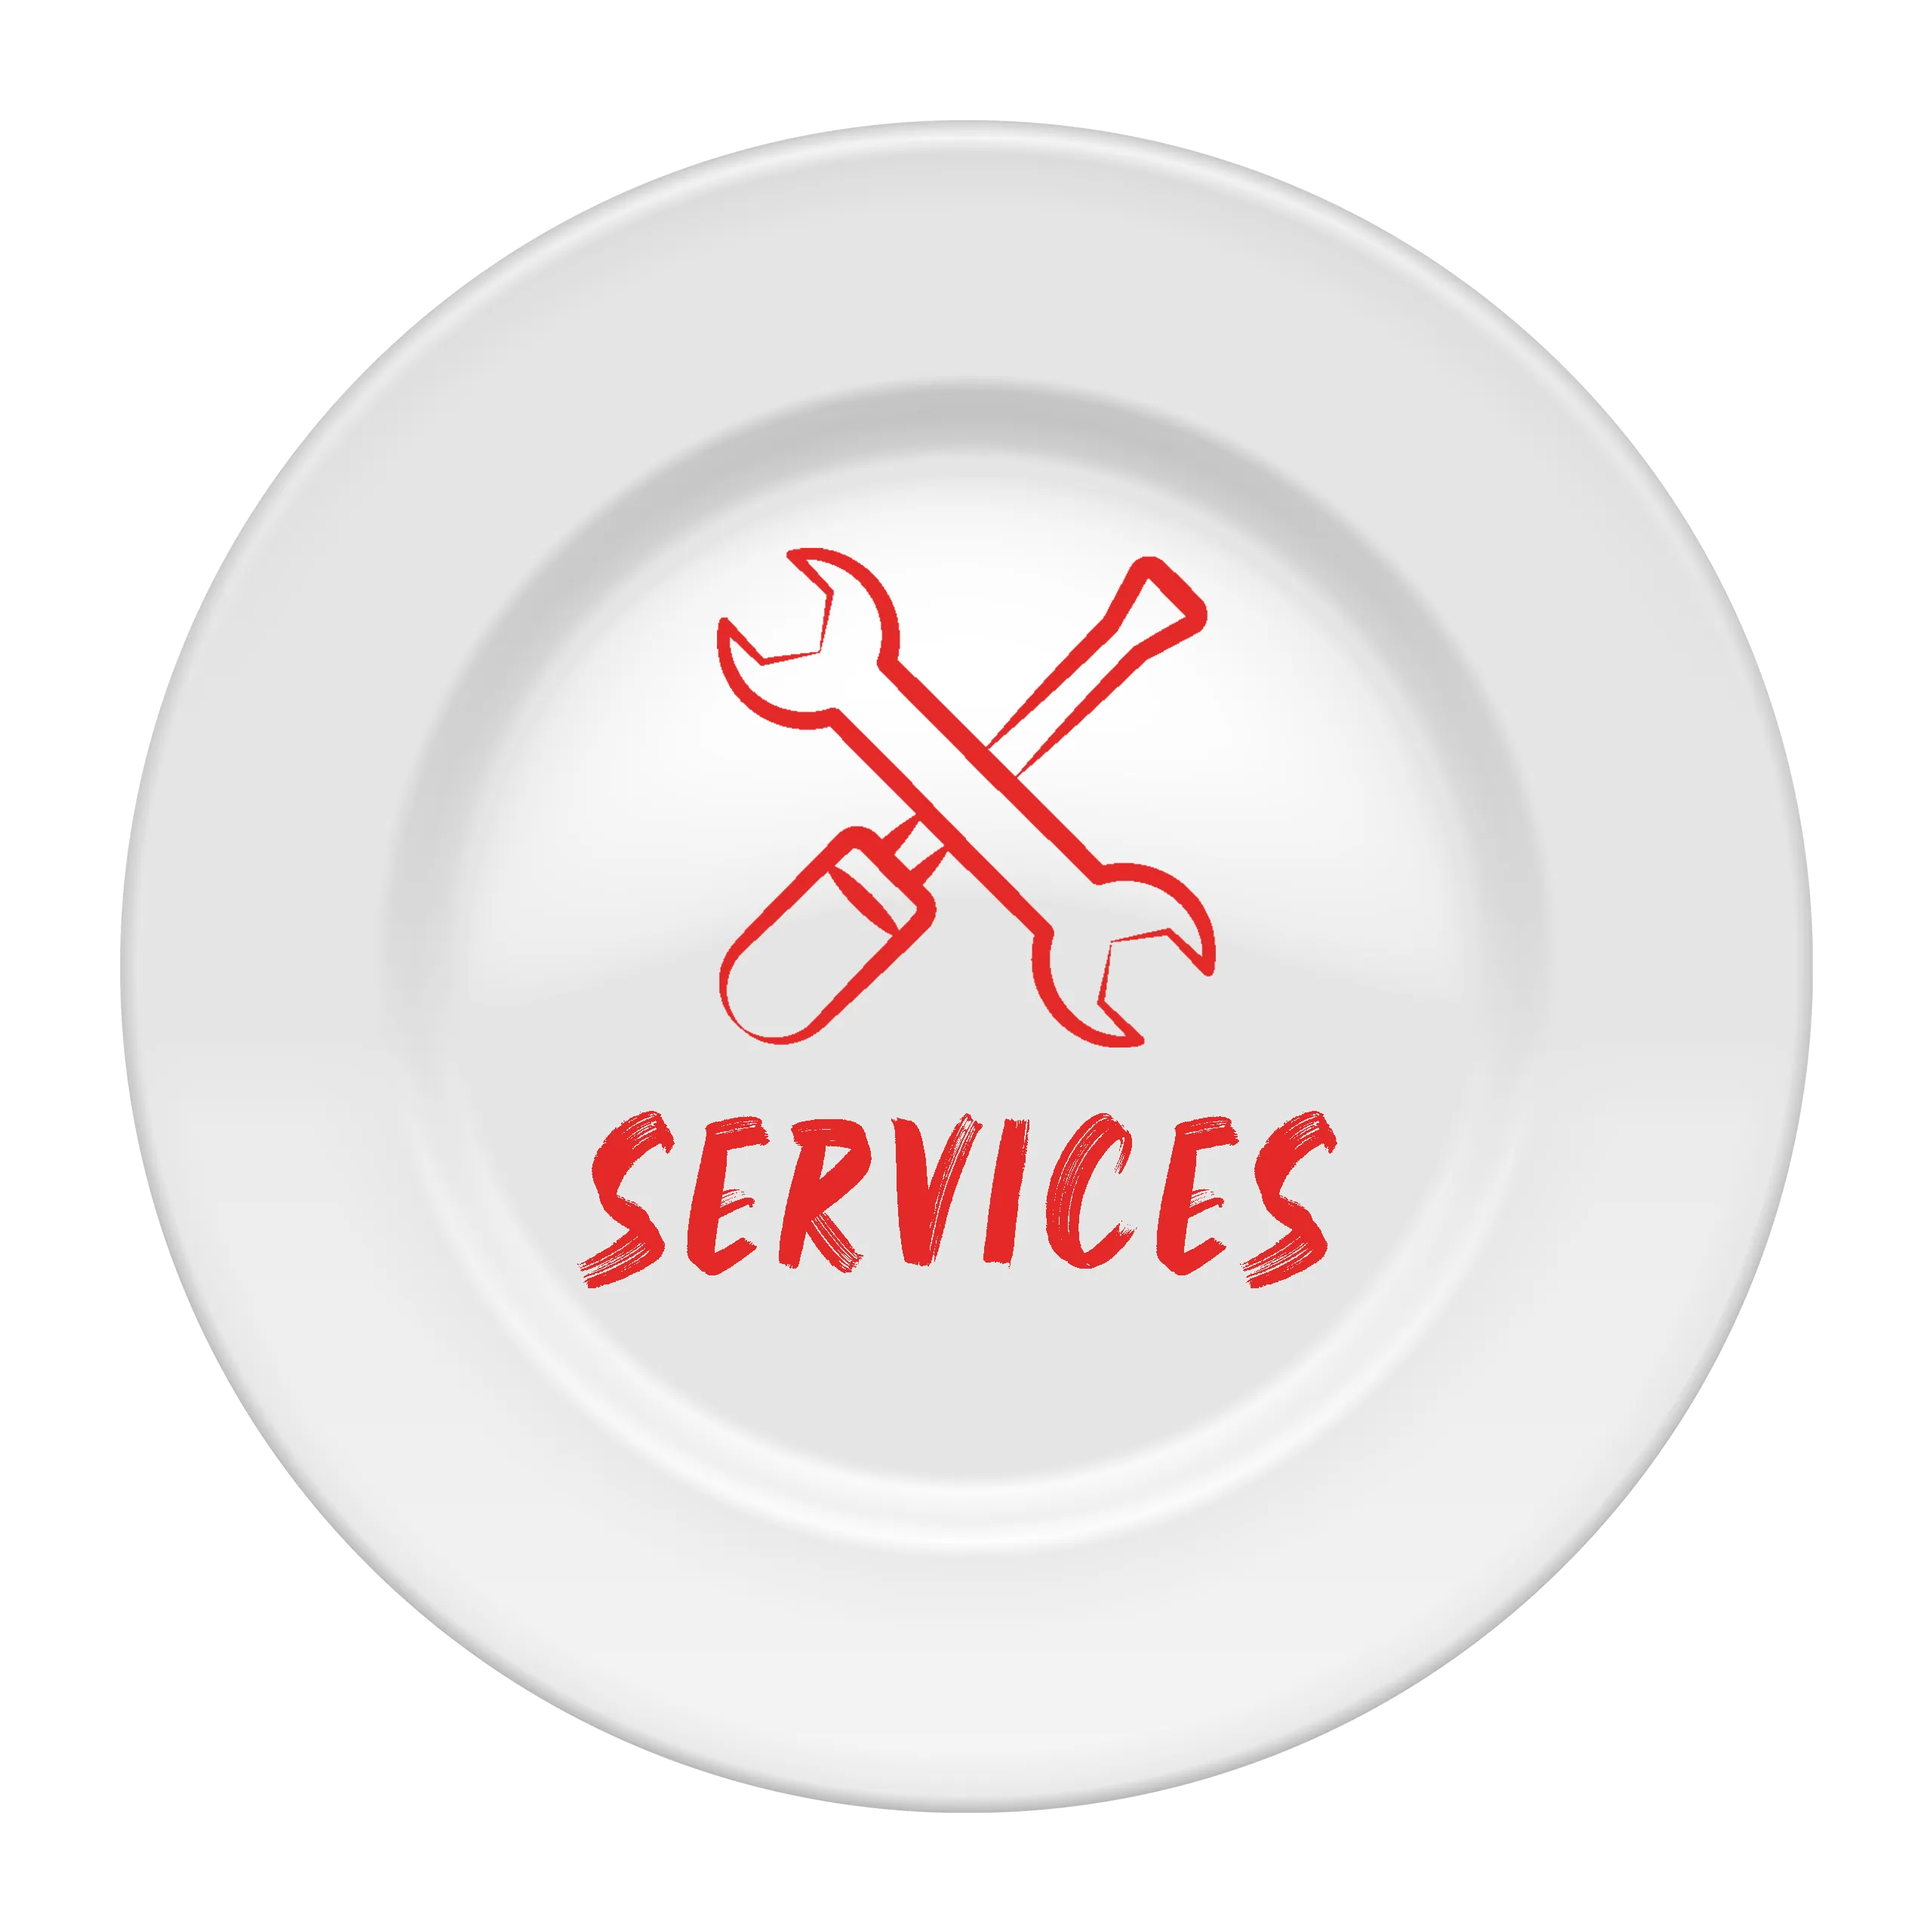 Services with marketing platter